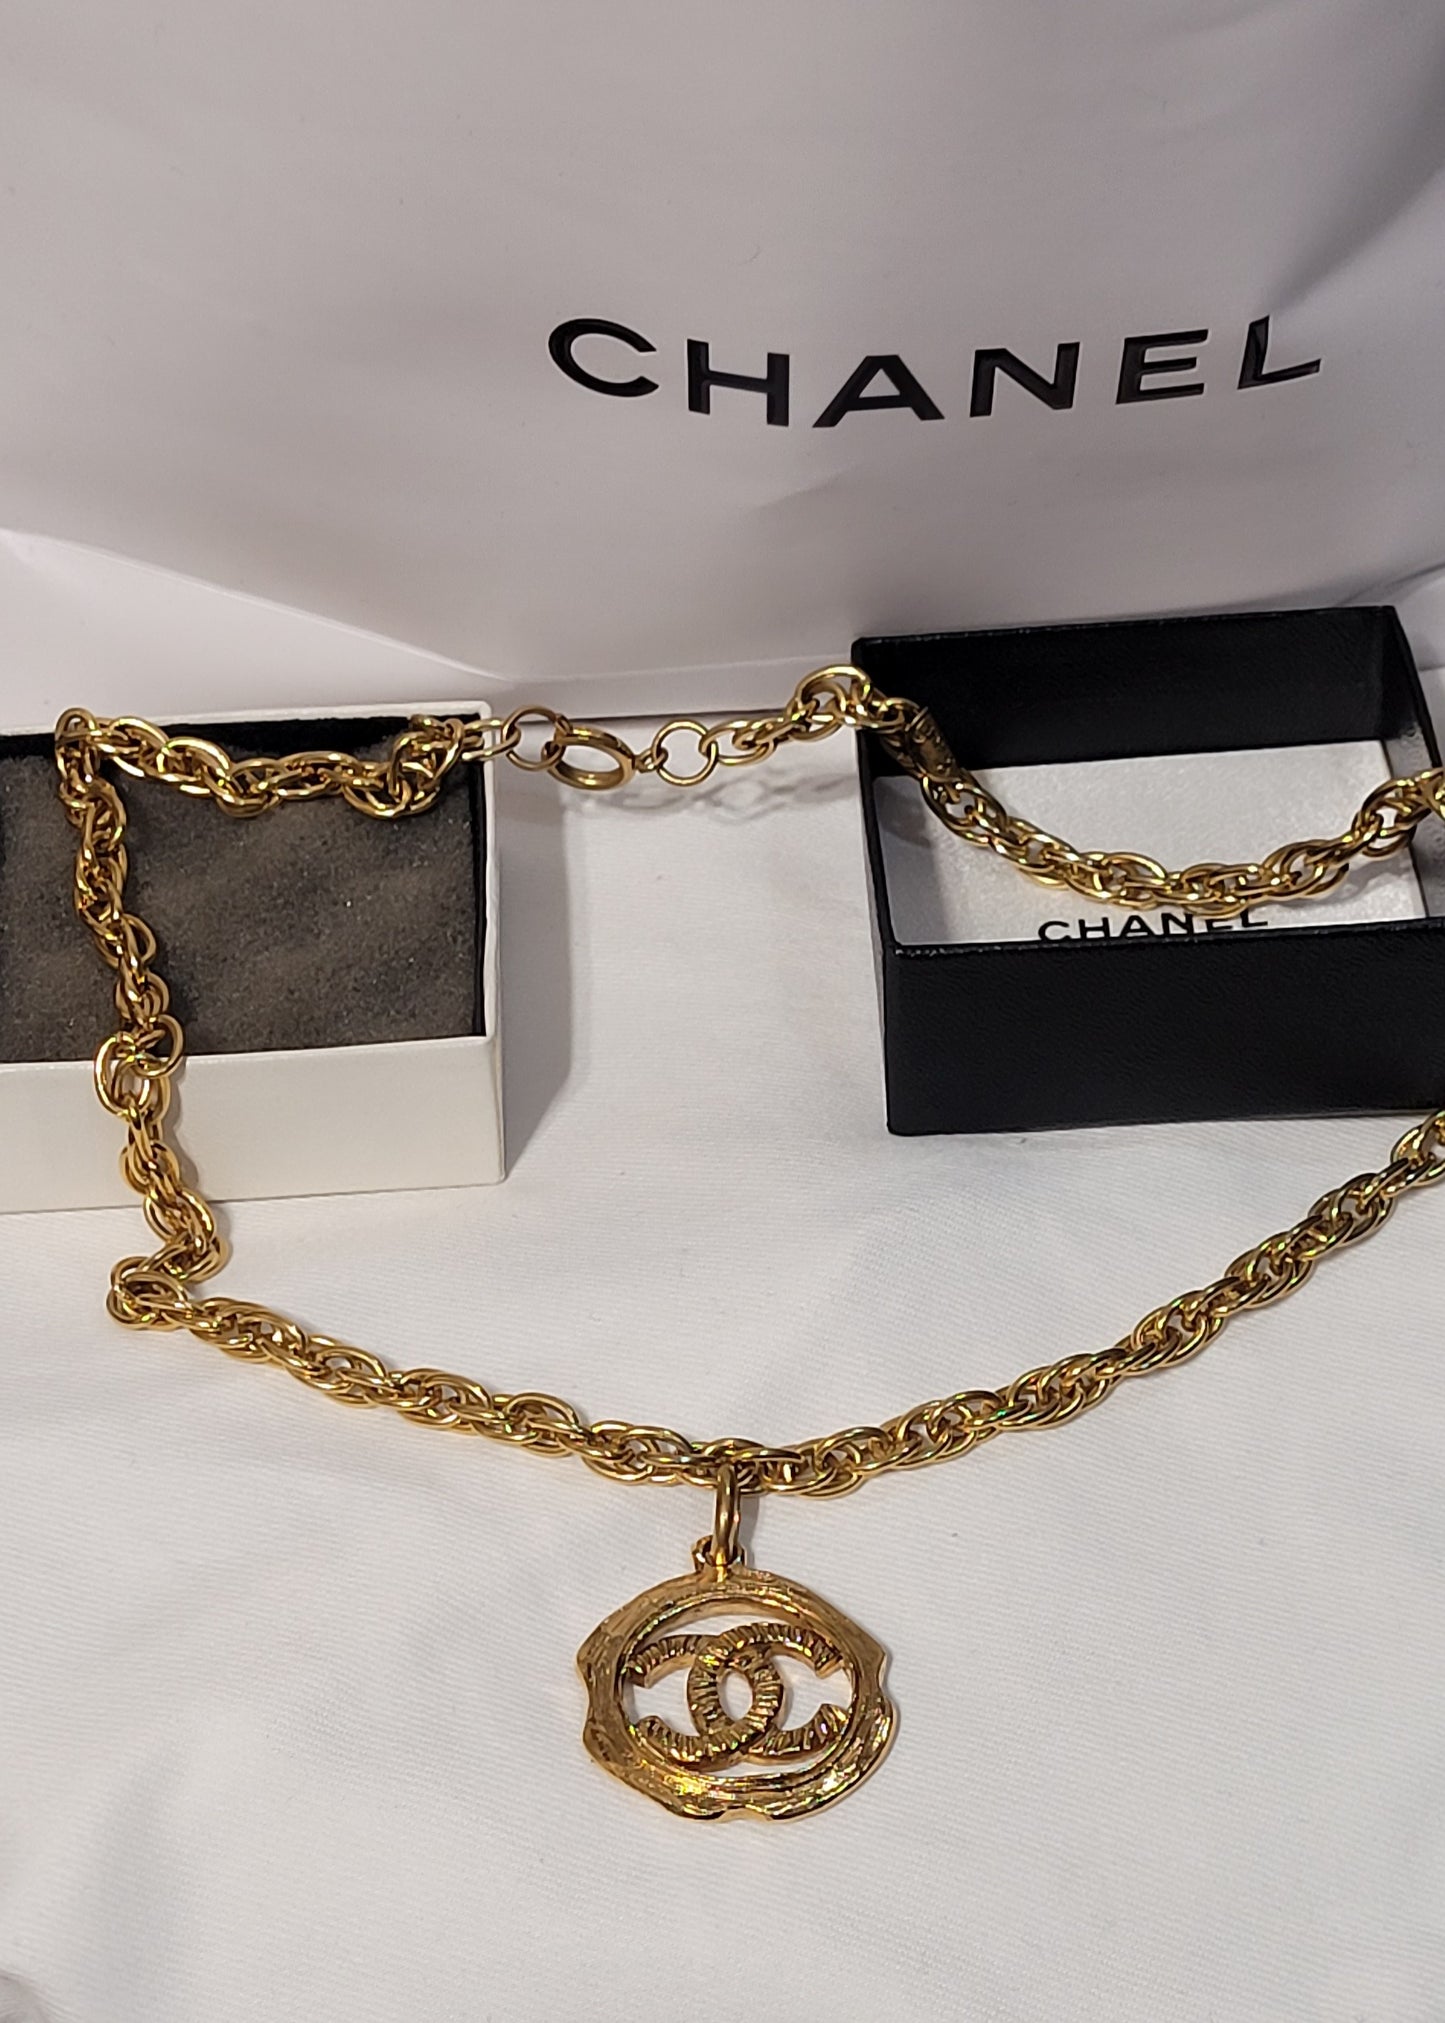 Preowned Vintage Chanel 24k gold plated Necklace